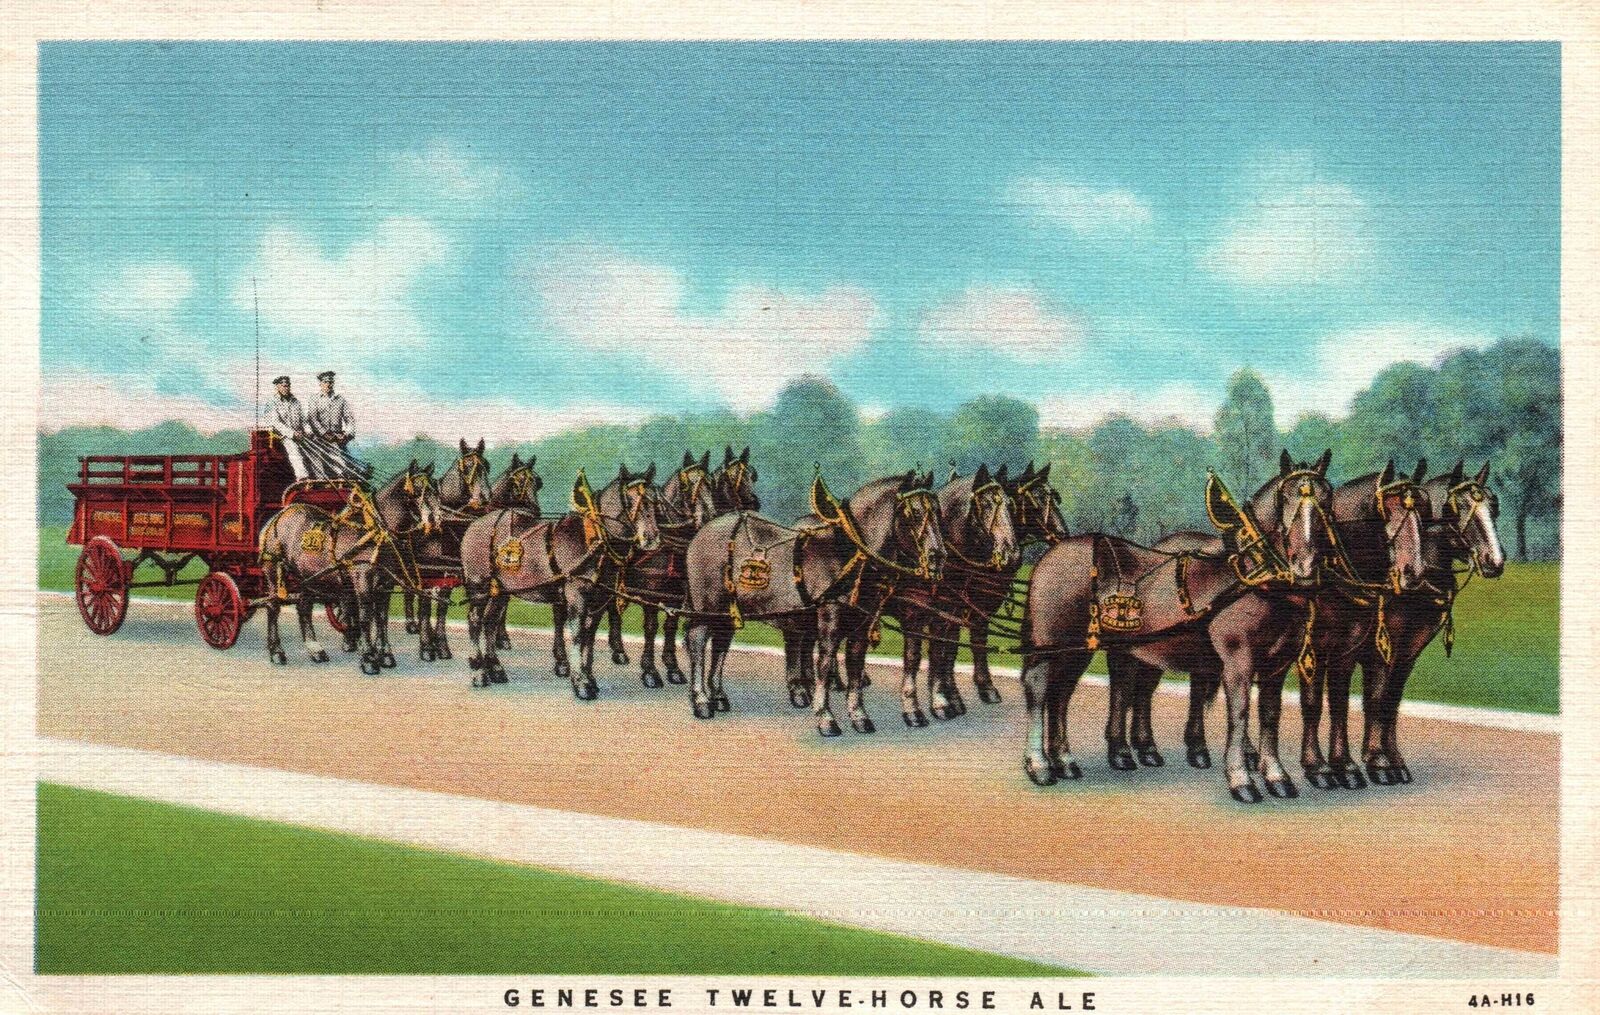 VINTAGE POSTCARD ADVERTISING GENESEE 12 HORSE ALE BREWING COMPANY POSTED 1934